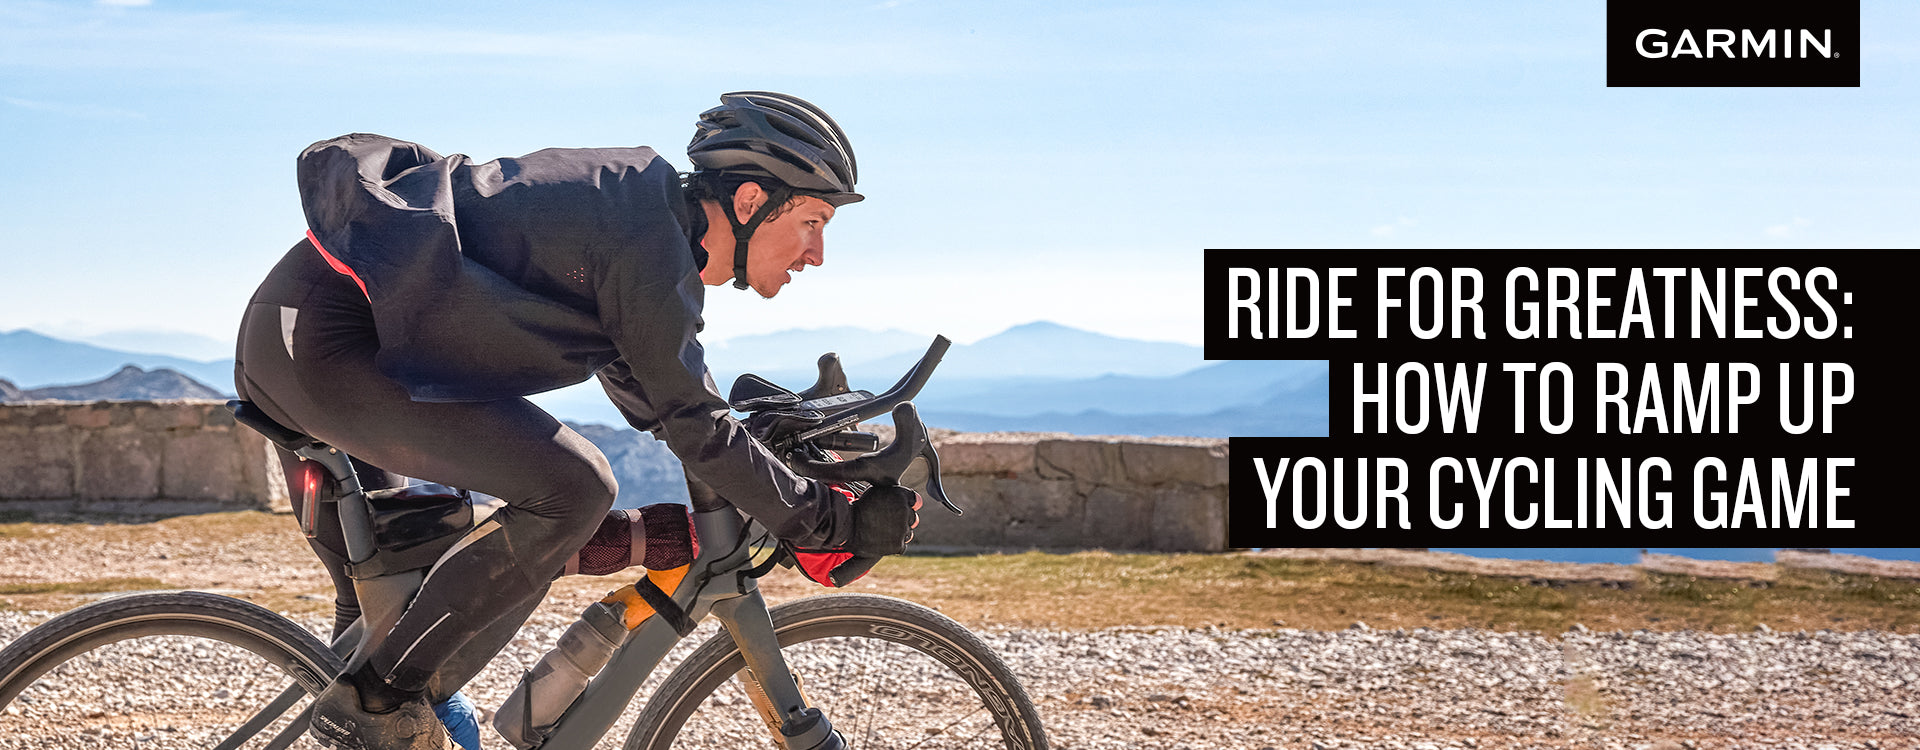 Ride for Greatness: How to Ramp Up Your Cycling Game – KINETIC by Garmin